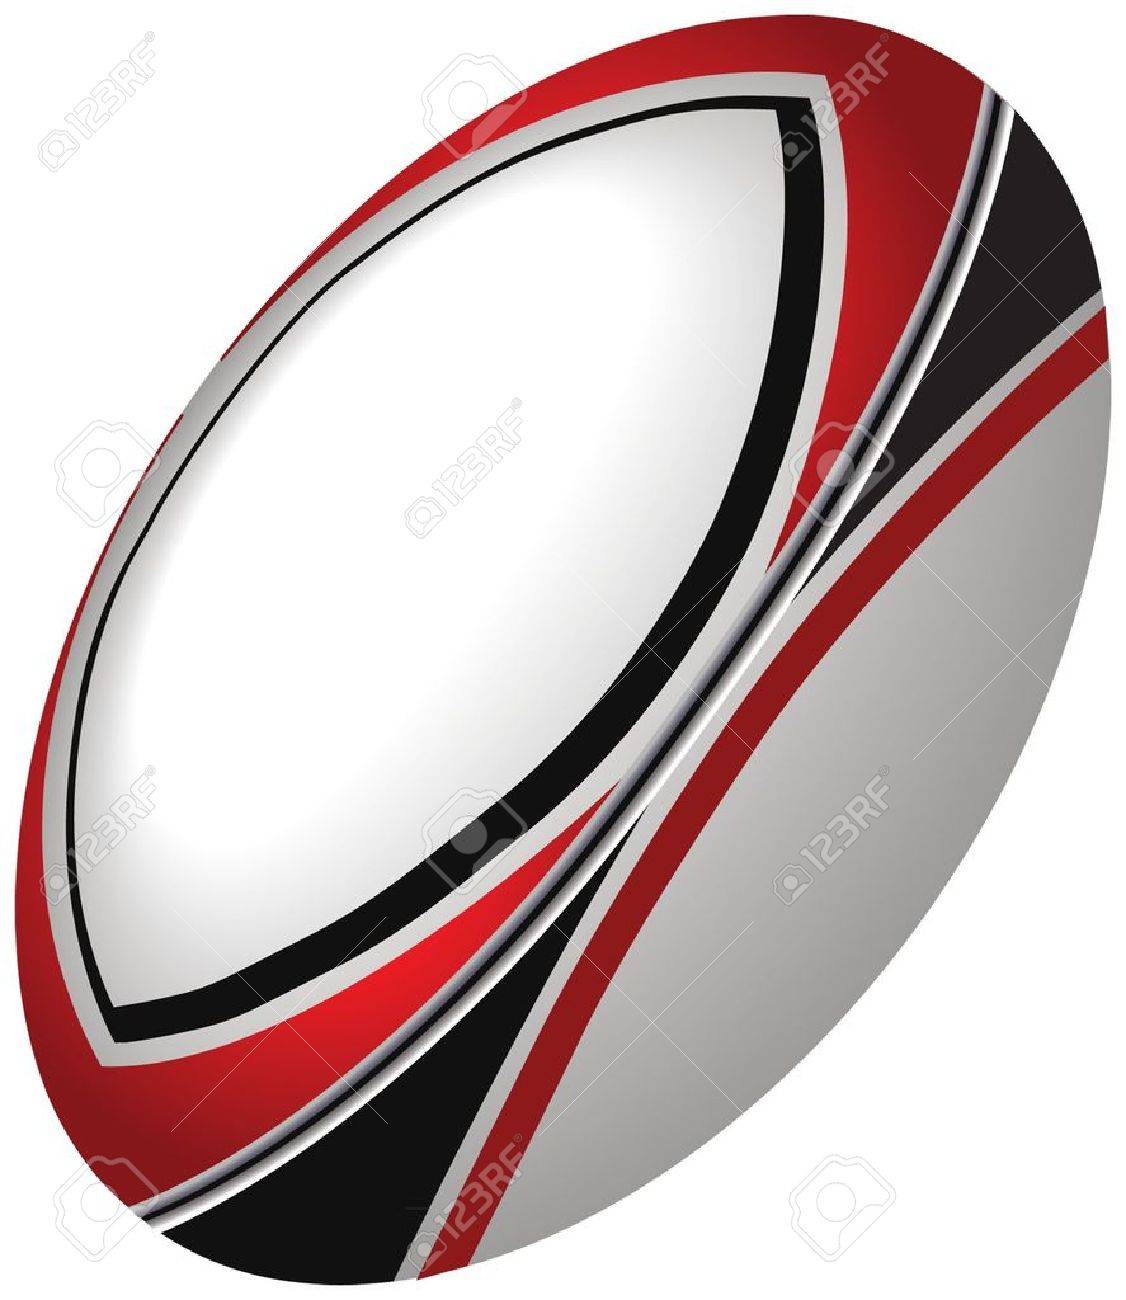 rugby-ball ClipartLook.com 